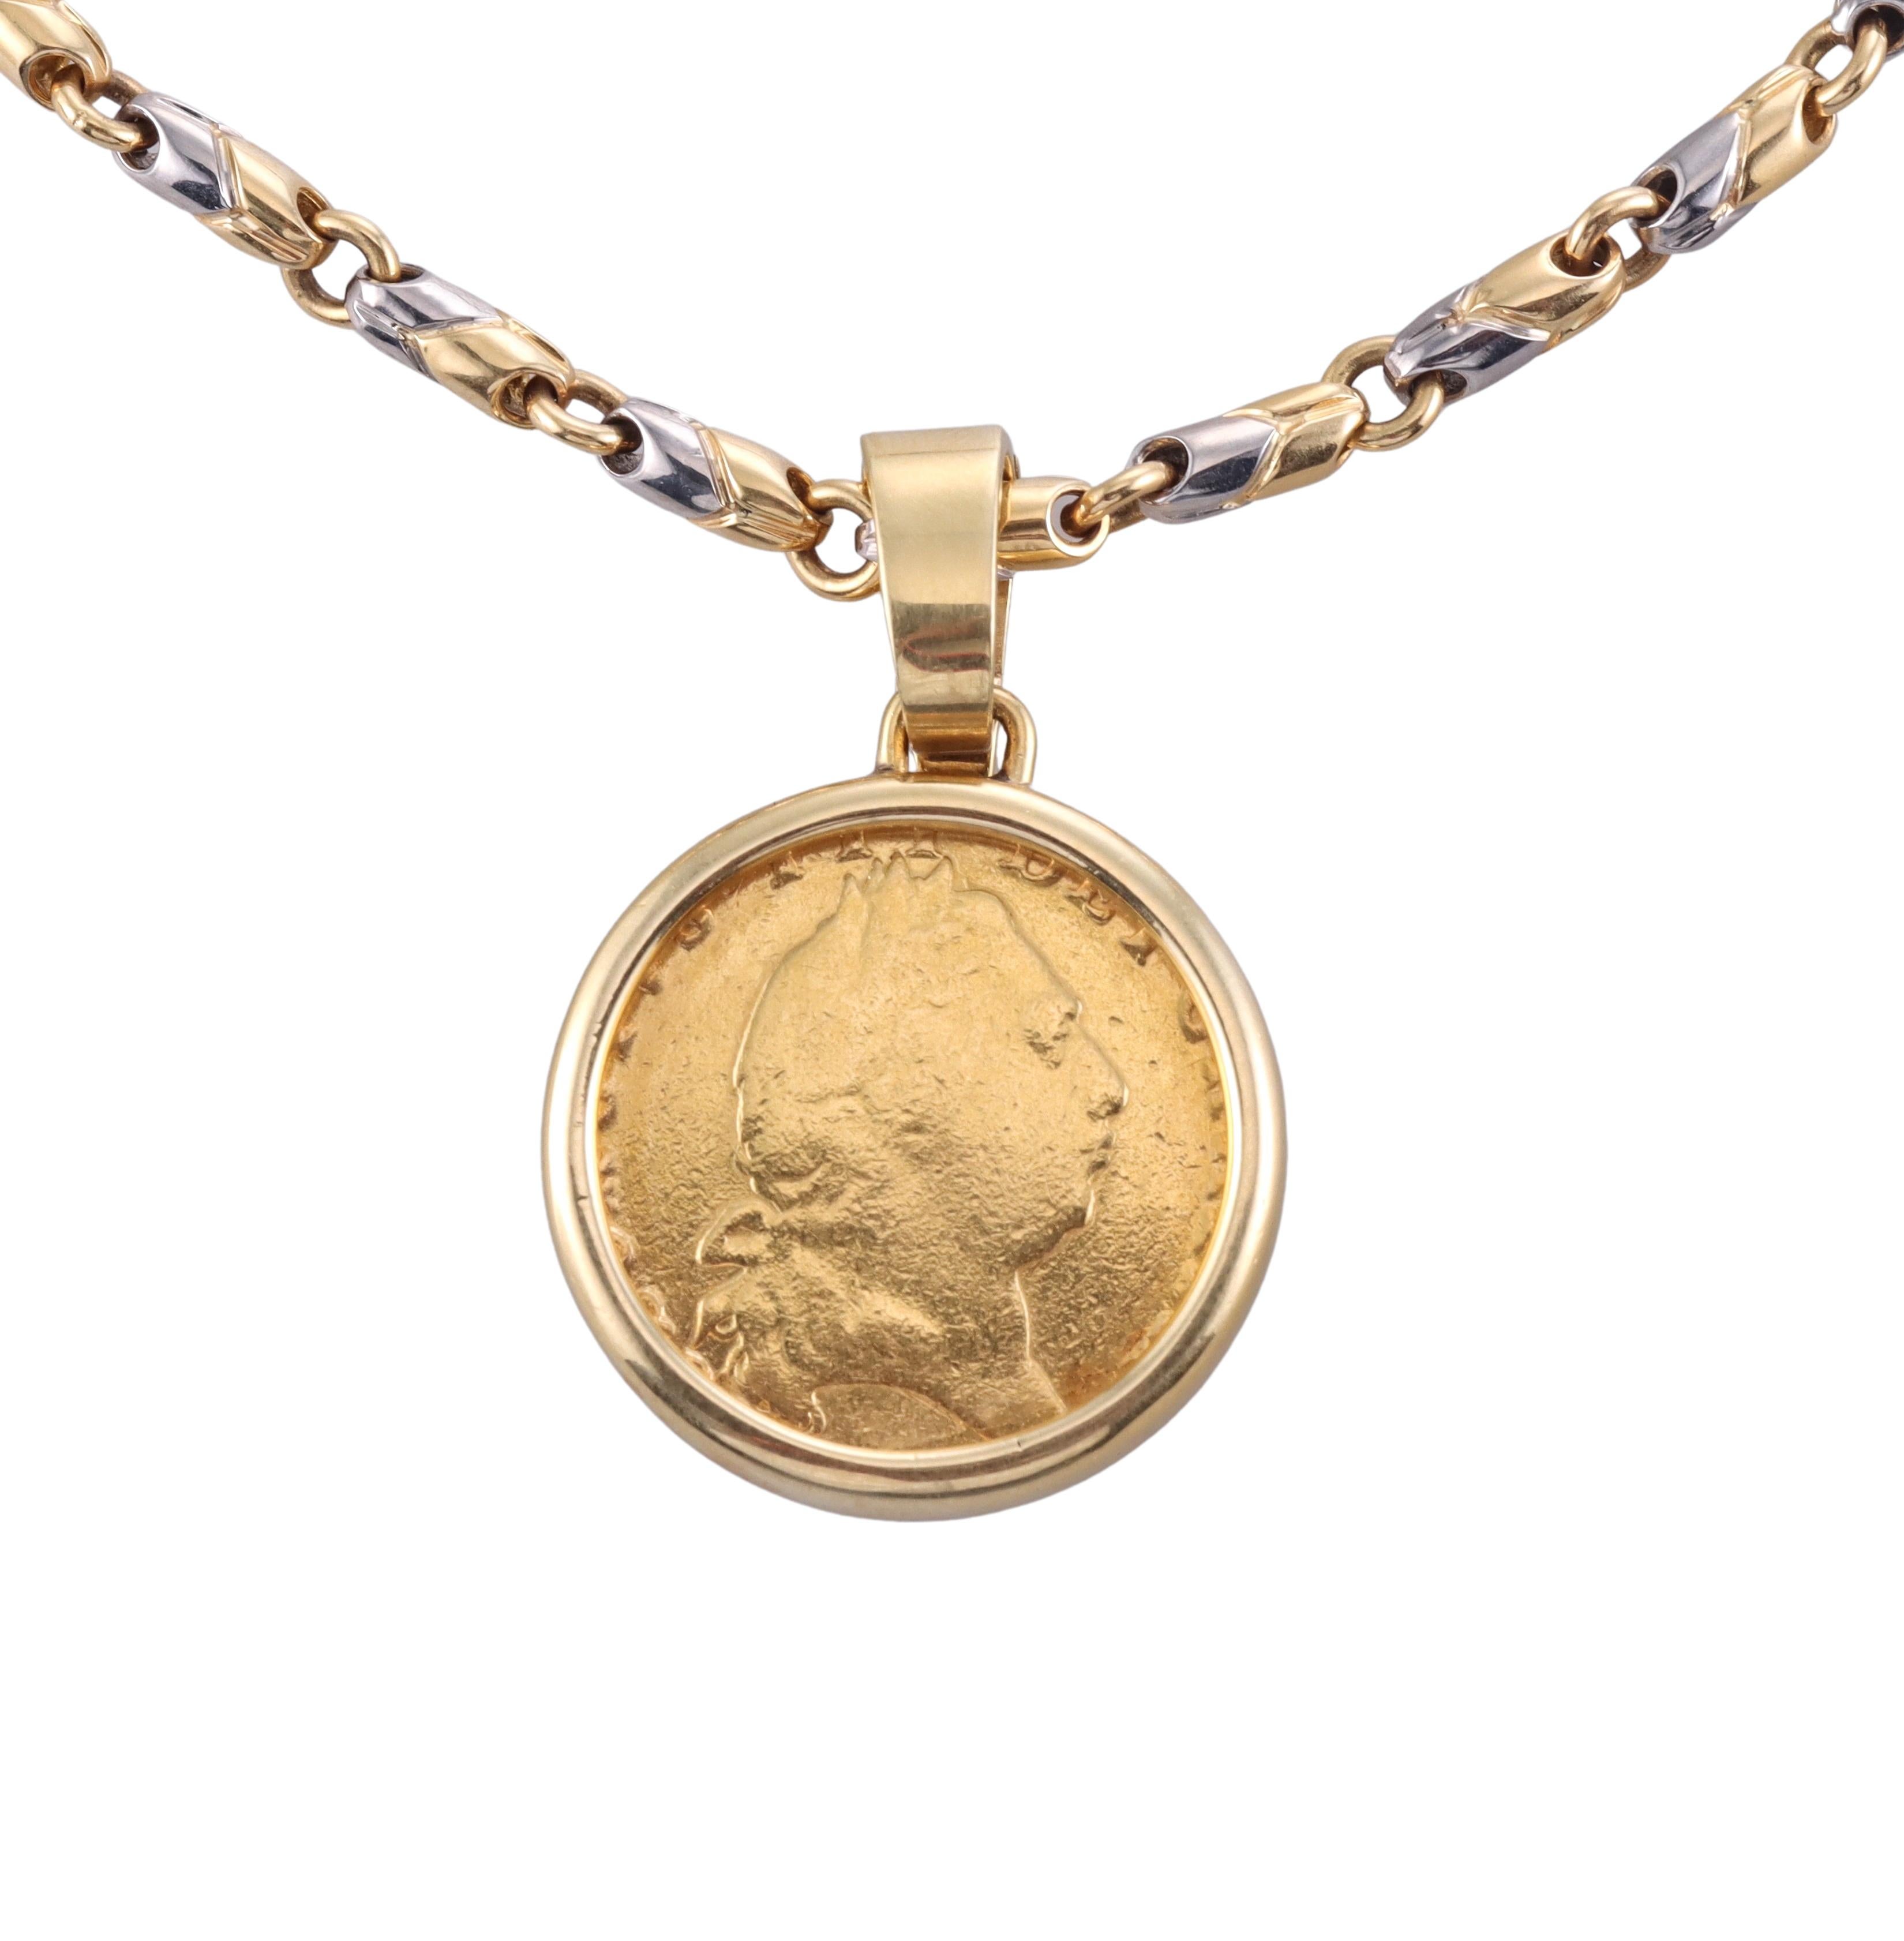 Iconic 18k gold and stainless steel chain necklace by Bvlgari, with a gold coin pendant. Necklace is 15